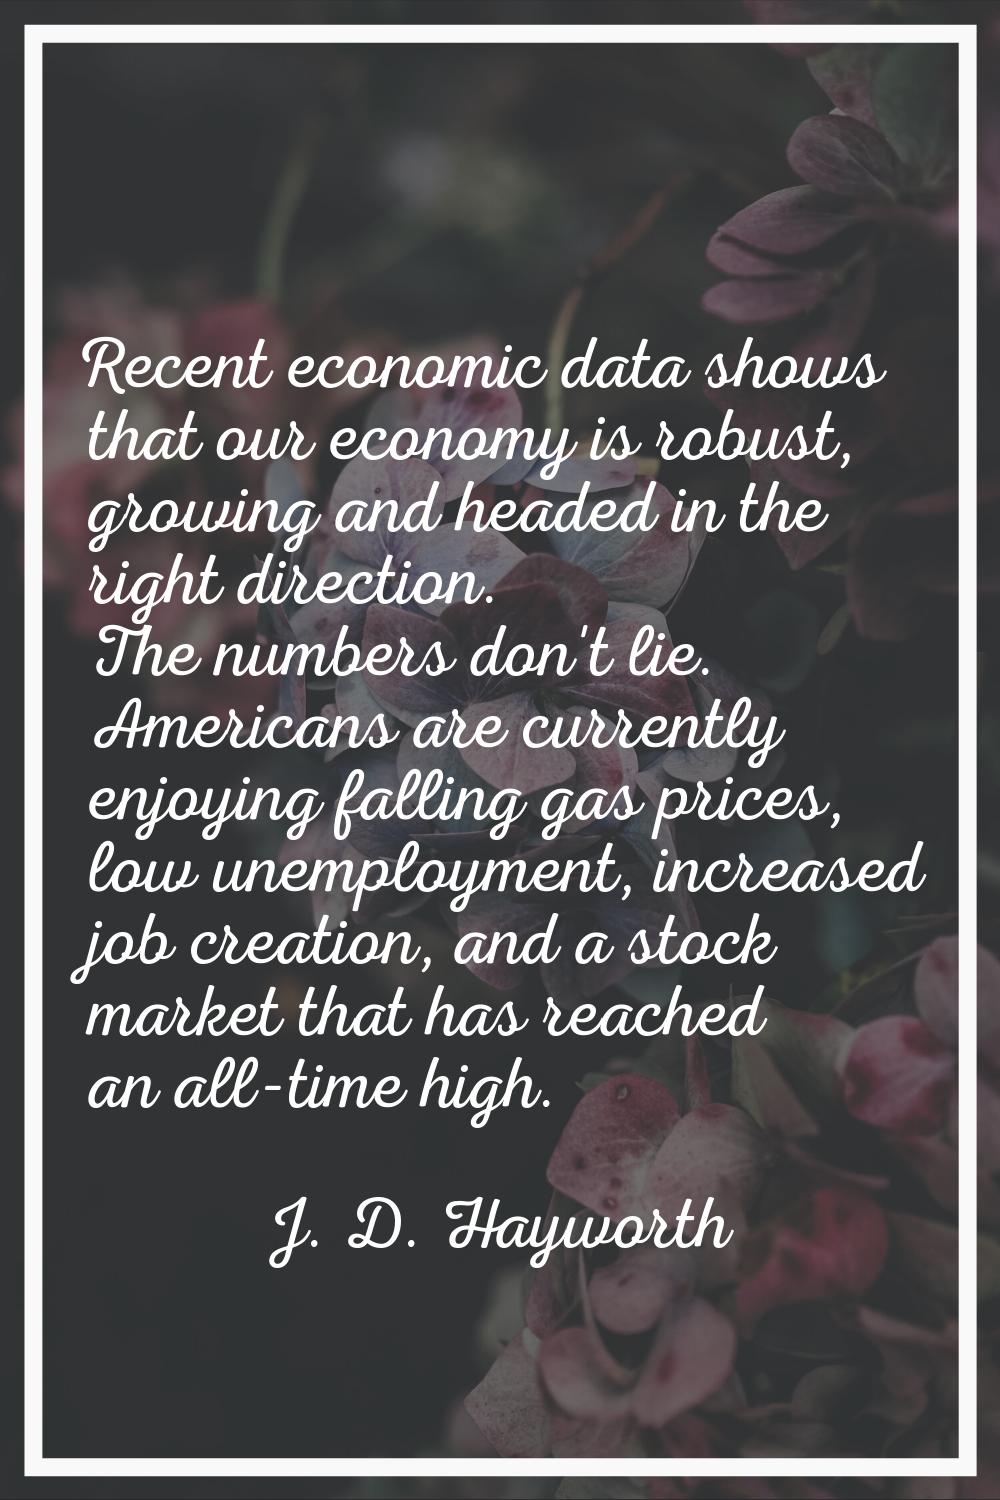 Recent economic data shows that our economy is robust, growing and headed in the right direction. T